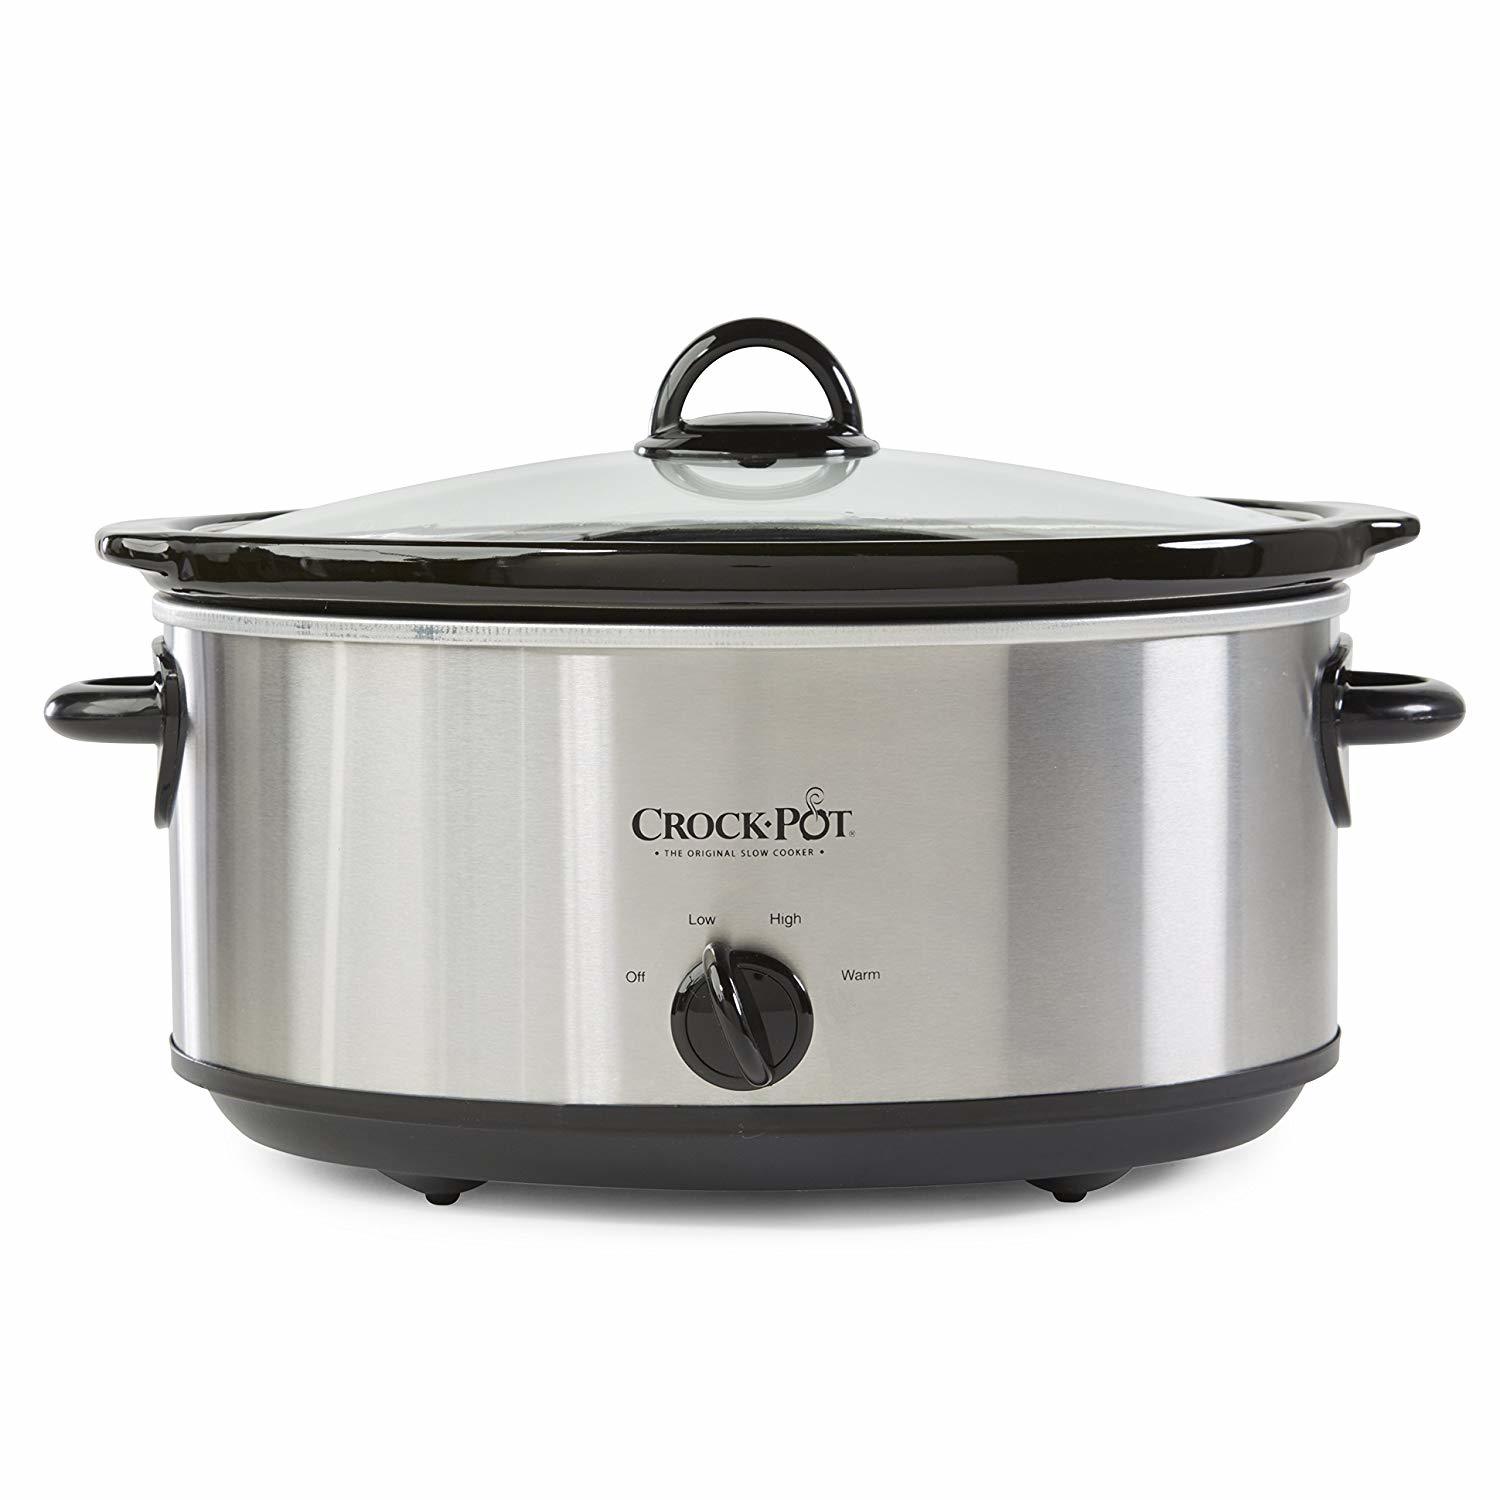 Crock-Pot 7-Quart Stainless Steel Manual Slow Cooker Now Just $16.99 Shipped From Amazon! save an extra 3 dollars